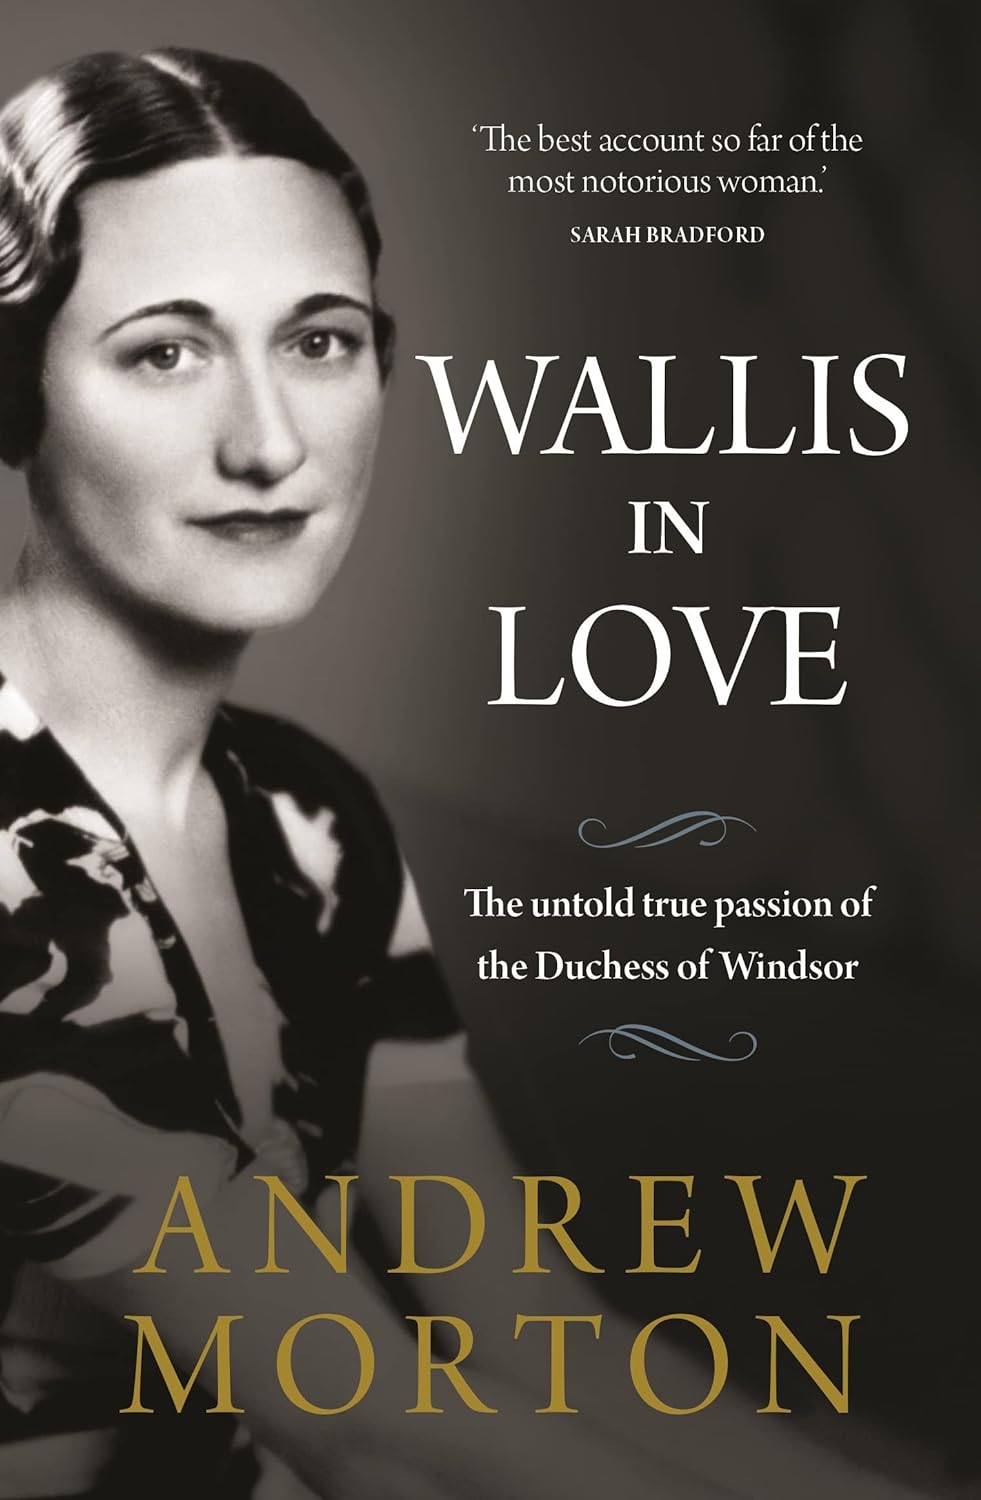 Time-Sensitive Offer: Save 30% on 'Wallis in Love: The untold true passion of the Duchess of Windsor'